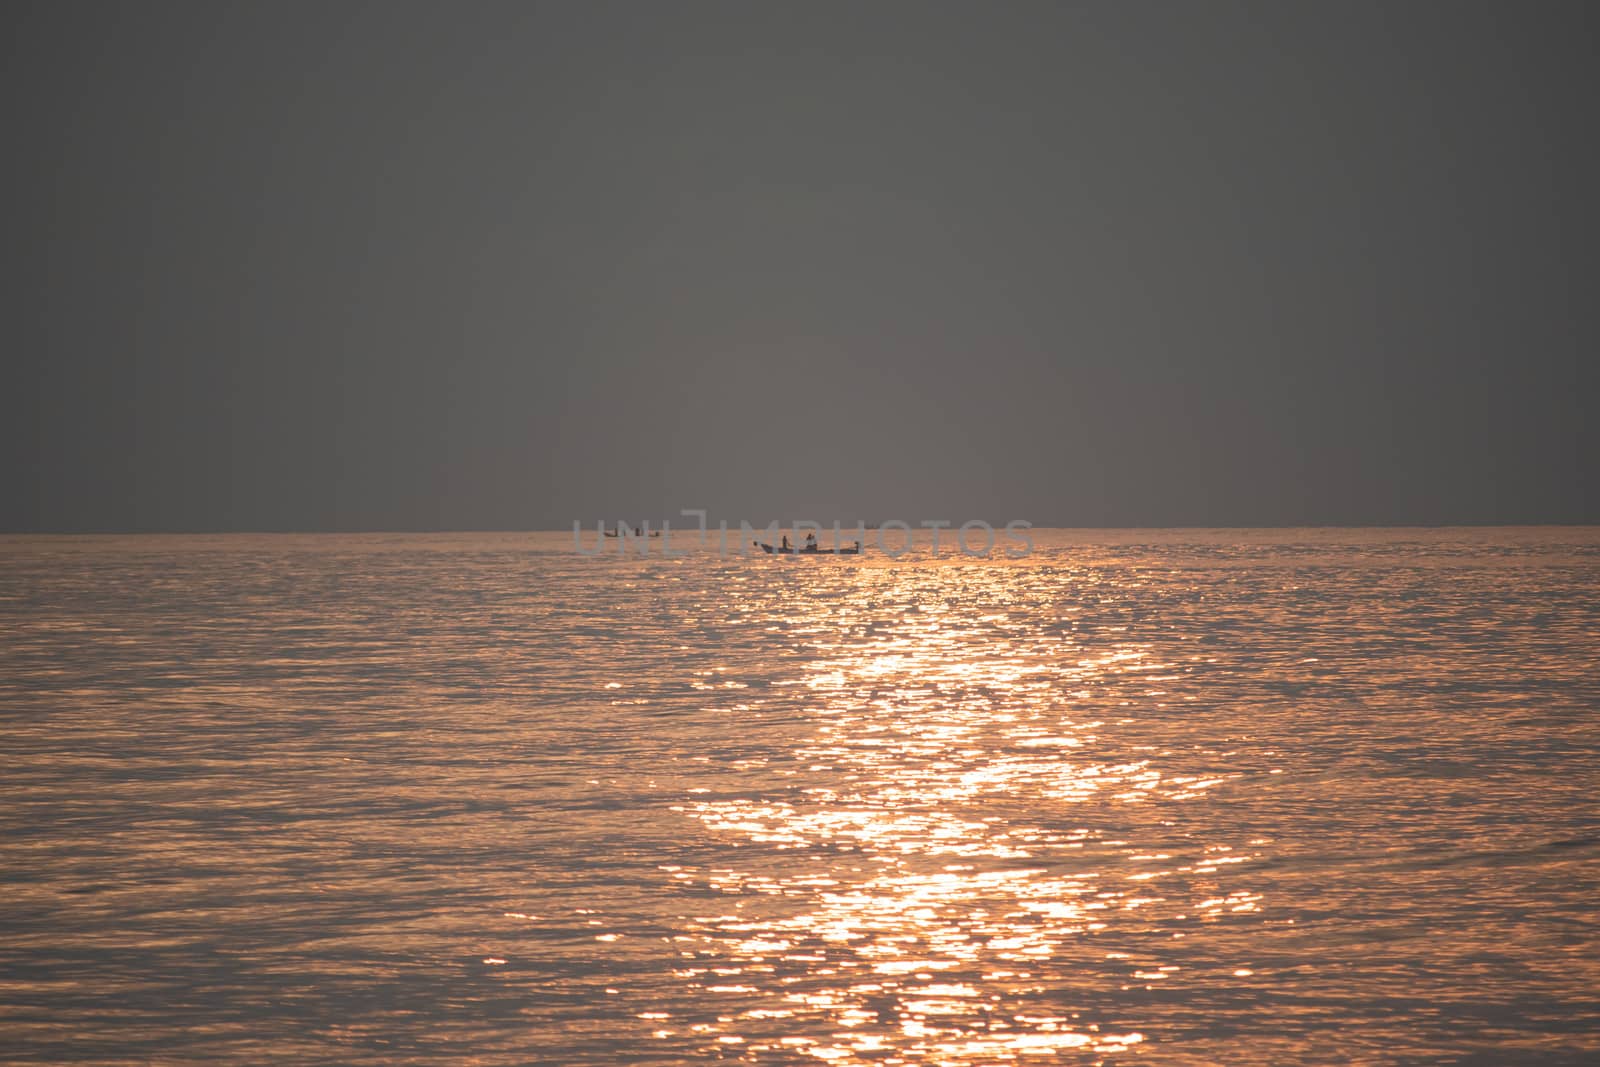 The sun's rays appear transparent in the sea water by 9500102400